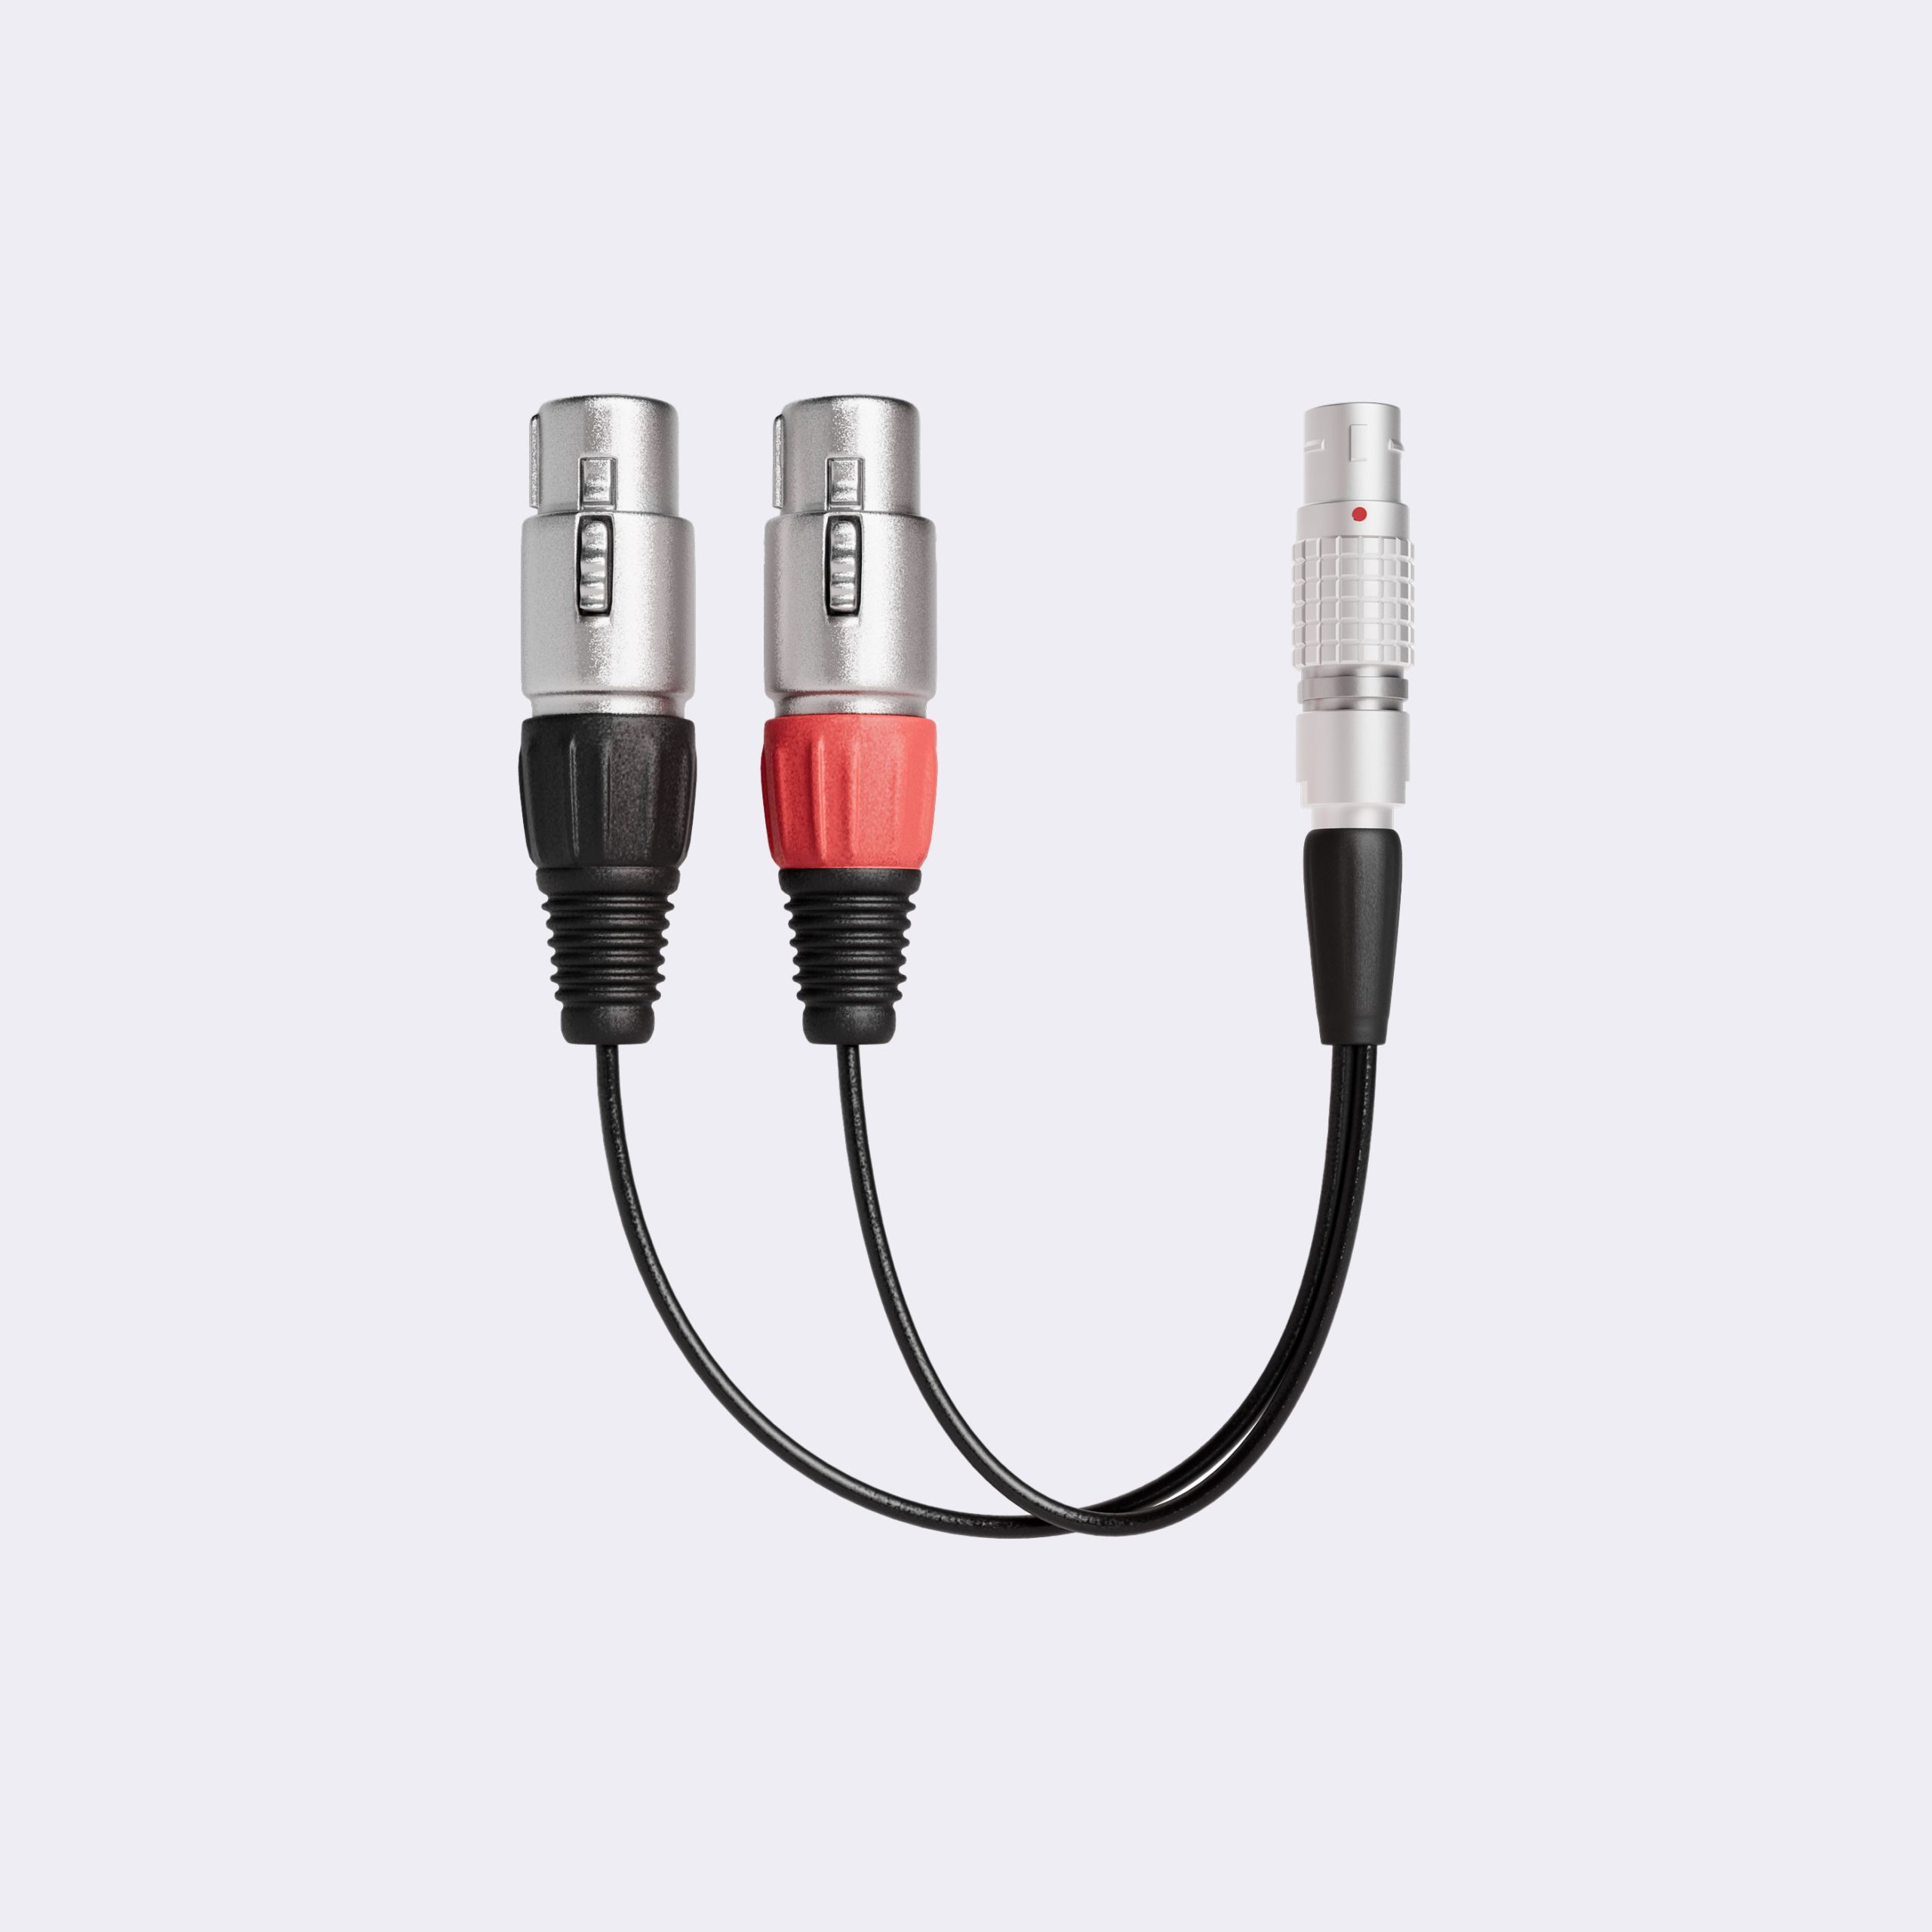 XLR Breakout Cable (input only) for Shogun 7